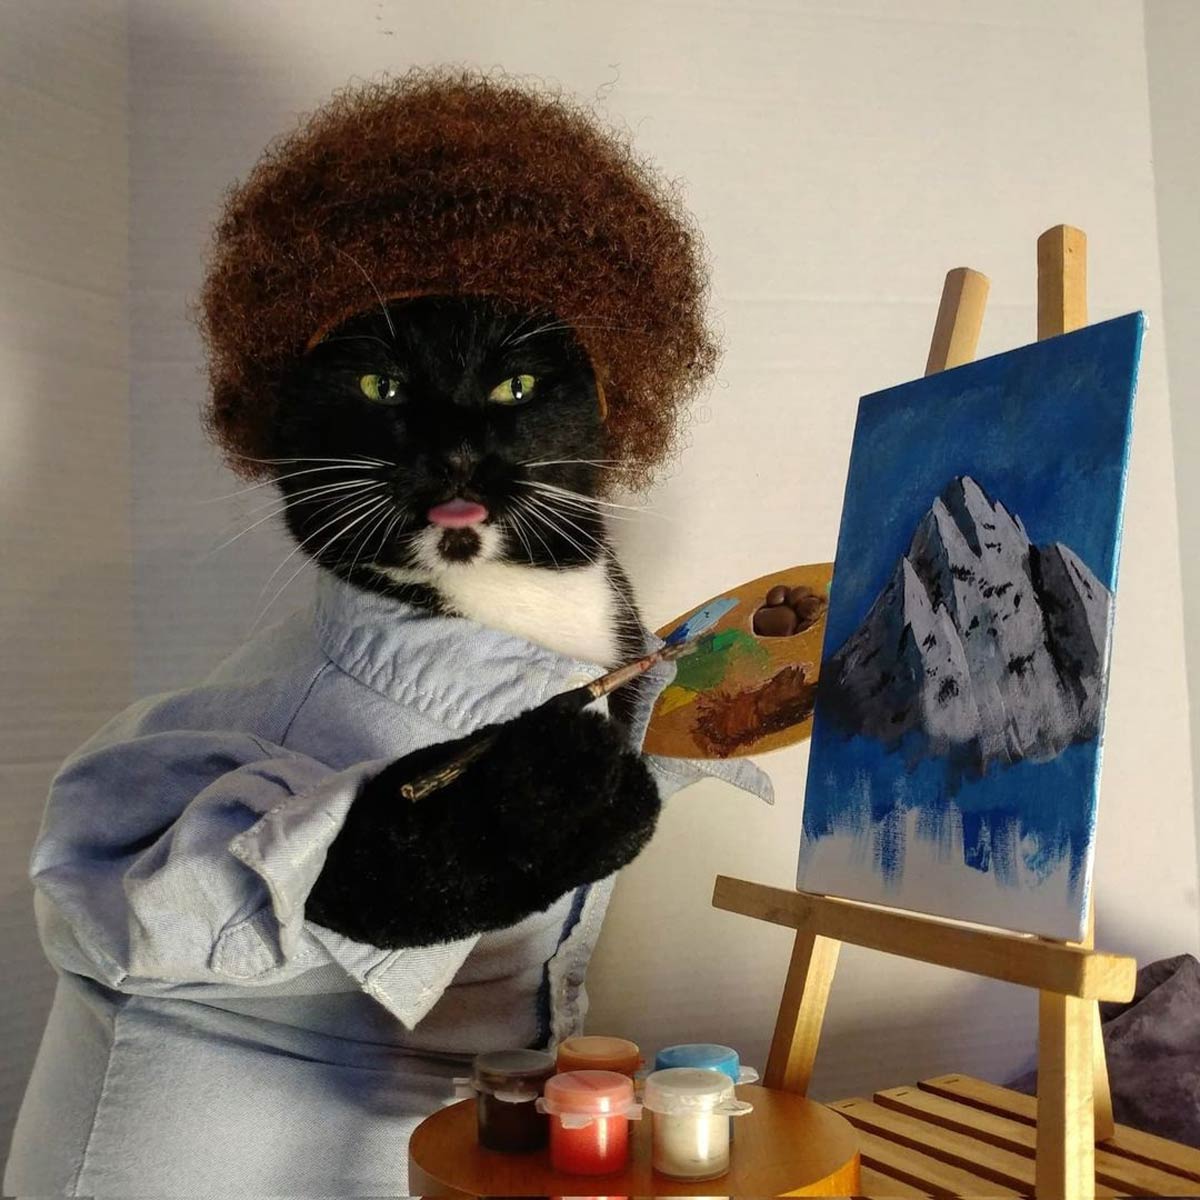 There are no meow-stakes, only happy accidents